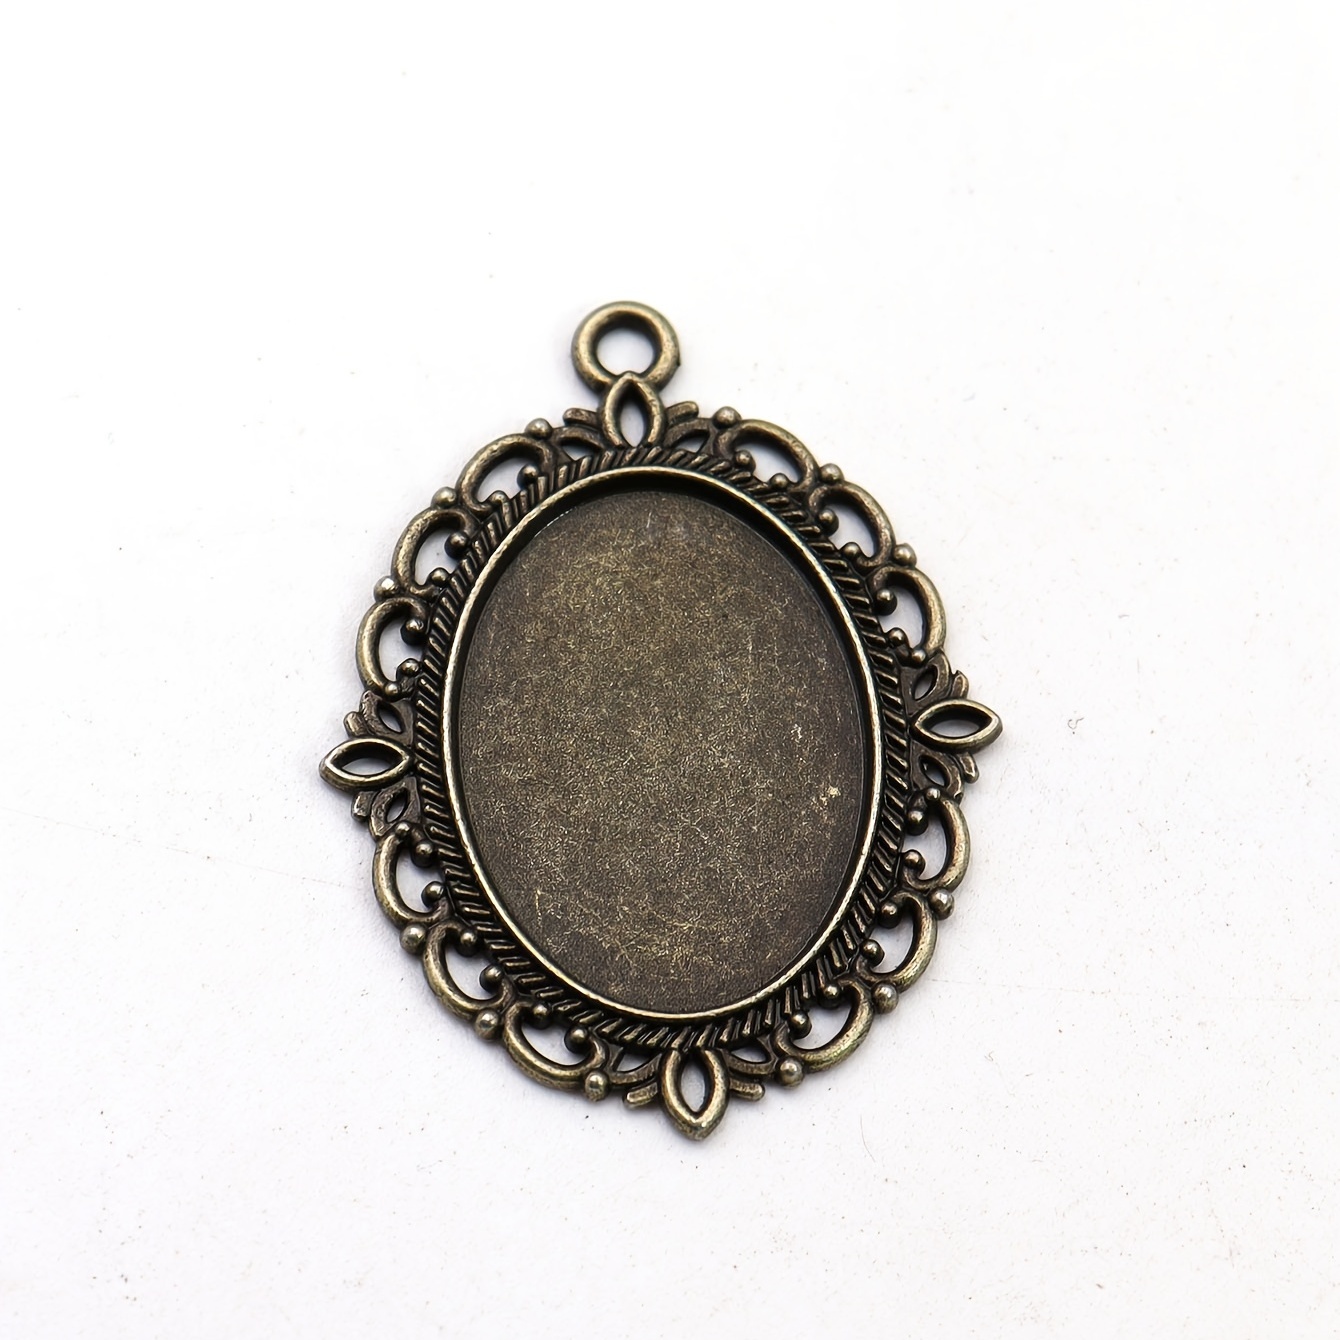 Pendant Trays, Bezel Pendant Trays Blanks With Glass Cabochons For